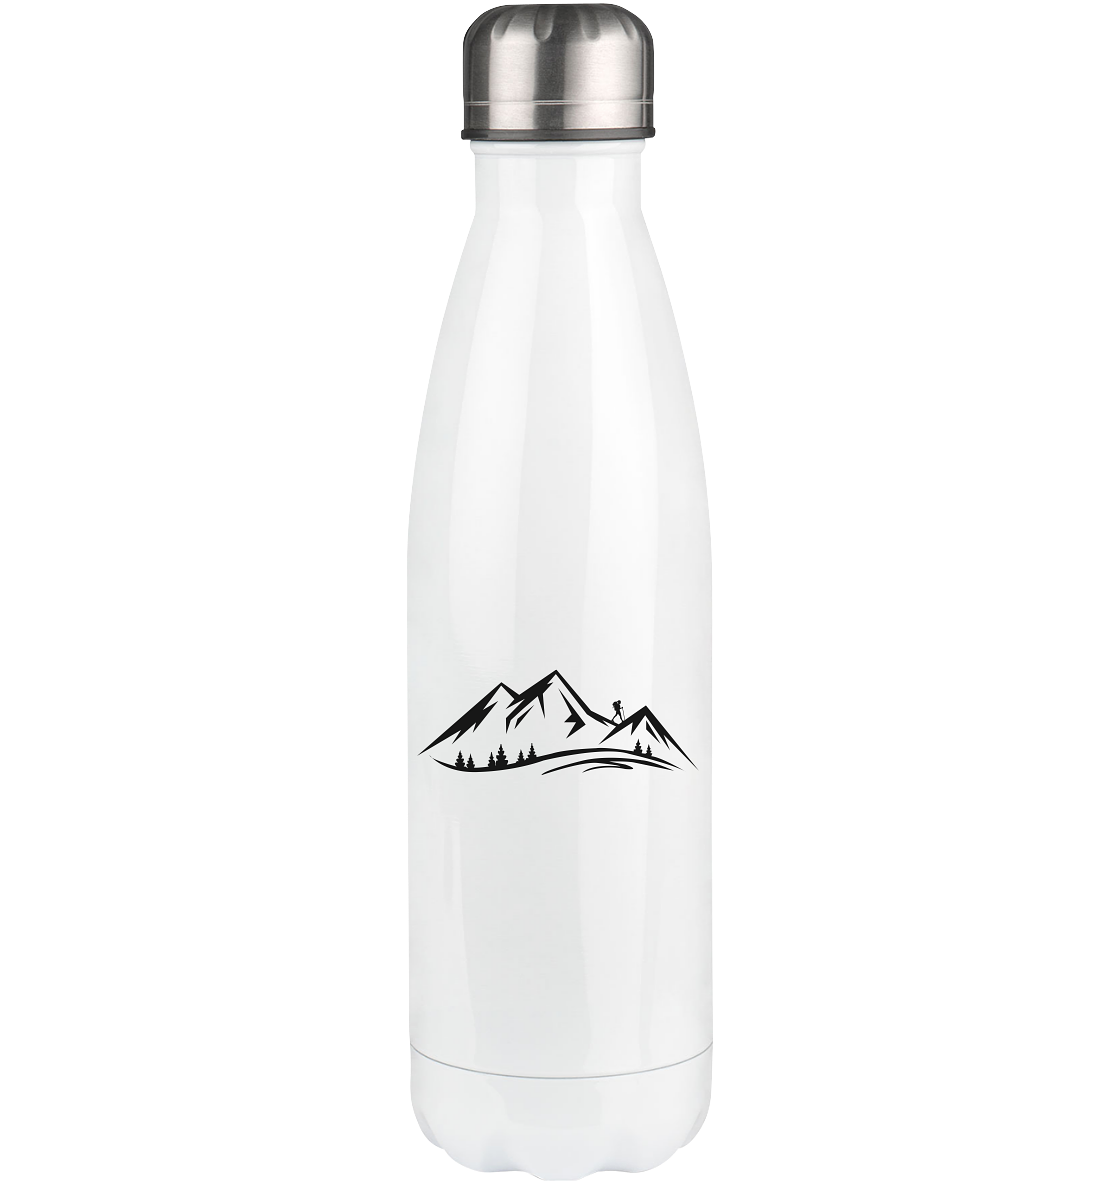 Mountain and Hiking - Edelstahl Thermosflasche wandern 500ml